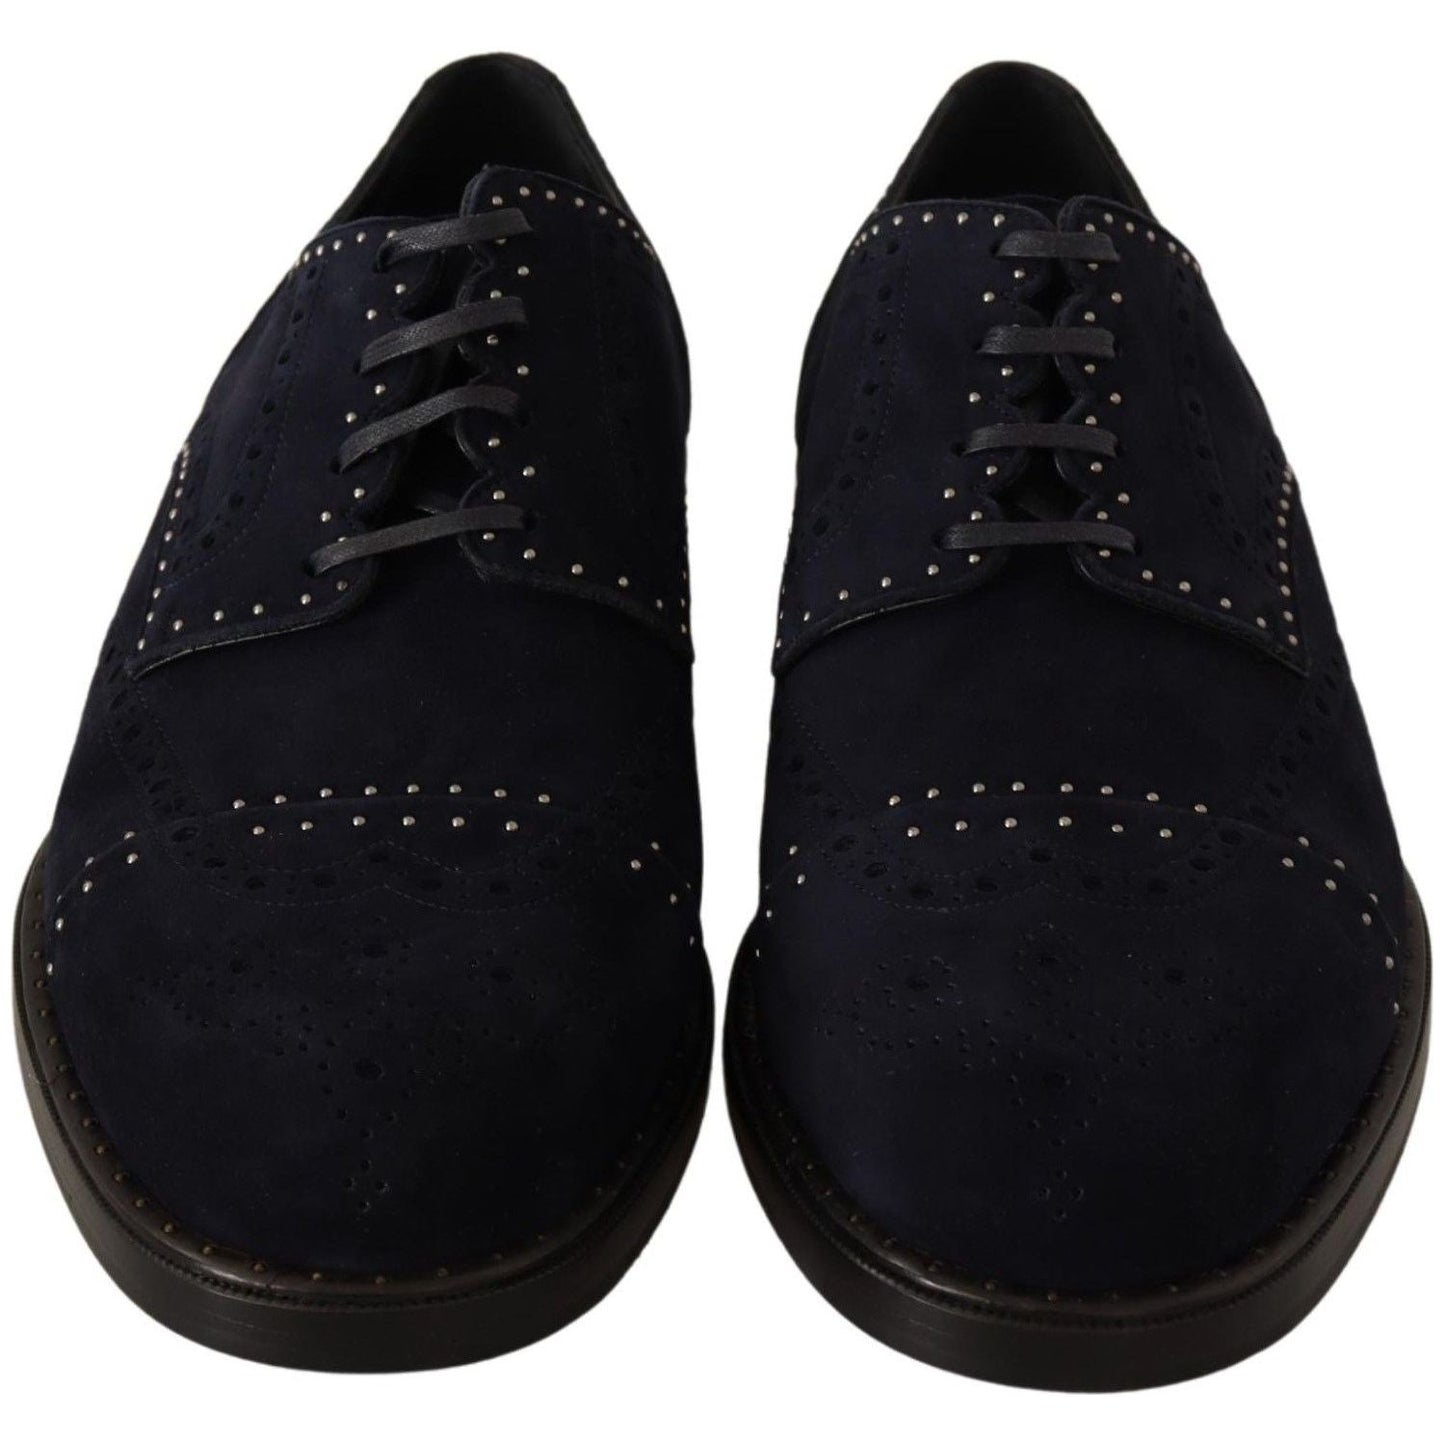 Dolce & Gabbana Elegant Suede Derby Shoes with Silver Studs blue-suede-leather-derby-studded-shoes Dress Shoes IMG_8959-20983adb-7ff.jpg